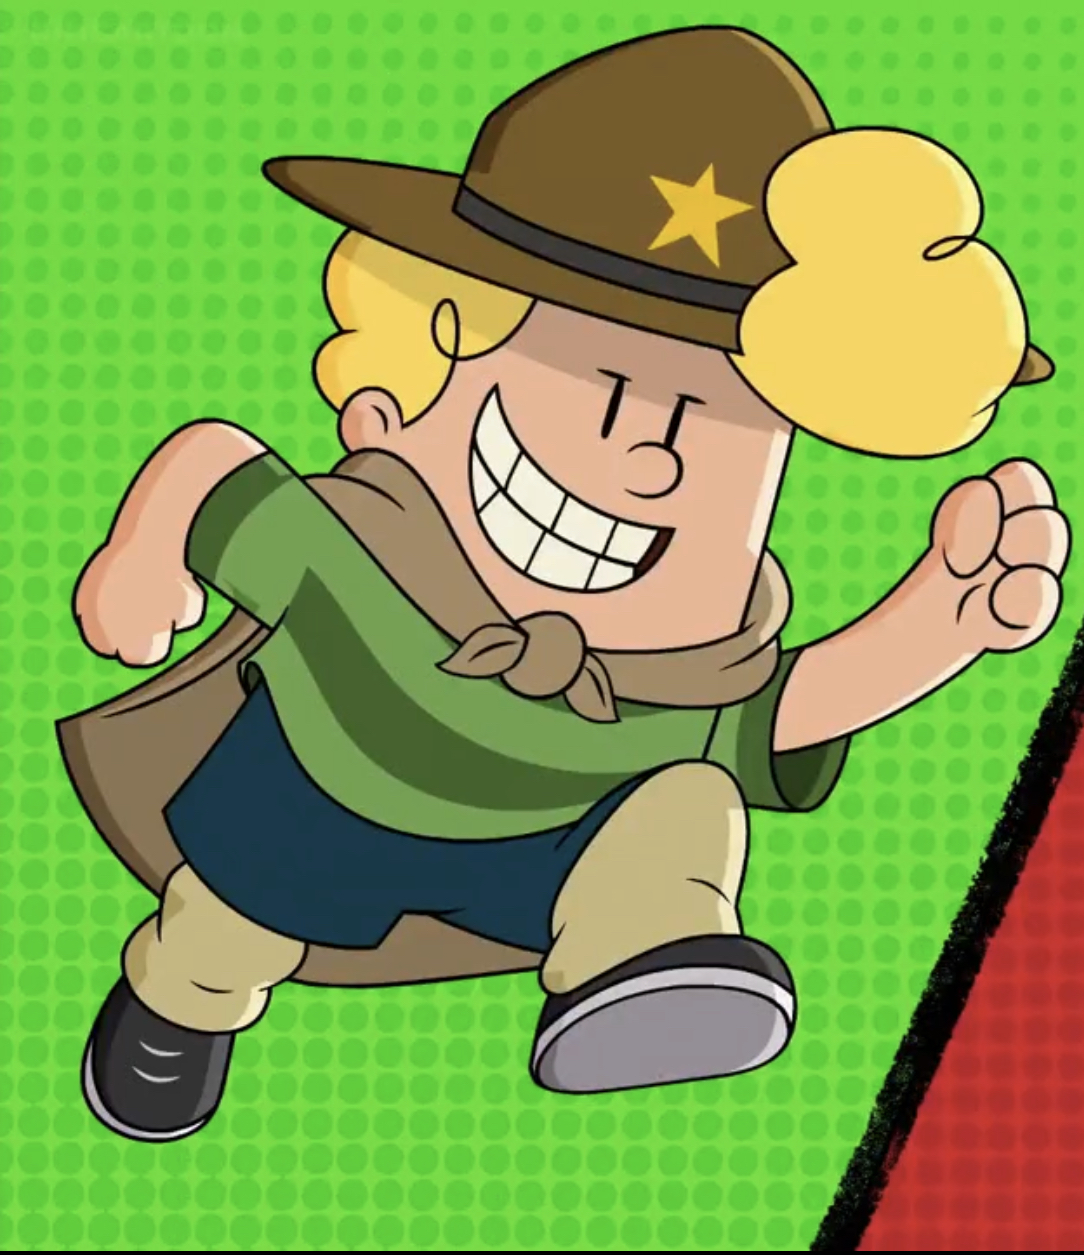 Great-Granny Girdle and Boxer Boy, Captain Underpants Wiki